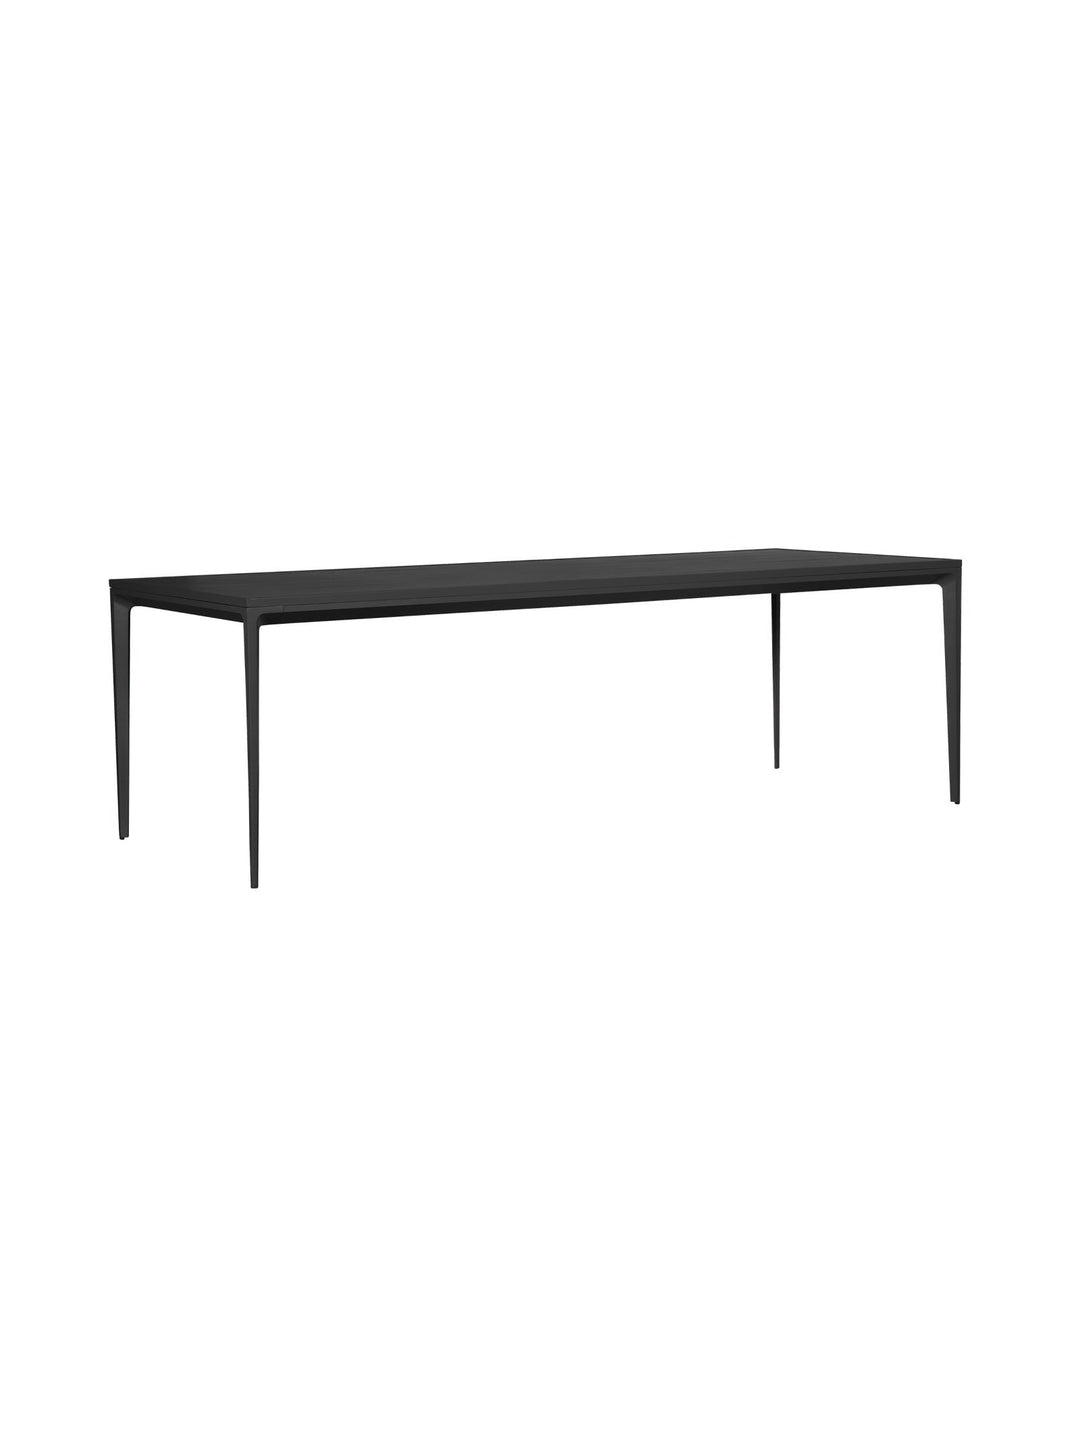 Kruger Outdoor 8-10 Seater Dining Table in Midnight - Outdoor Furniture- Hertex Haus Online - badge_fully_outdoor